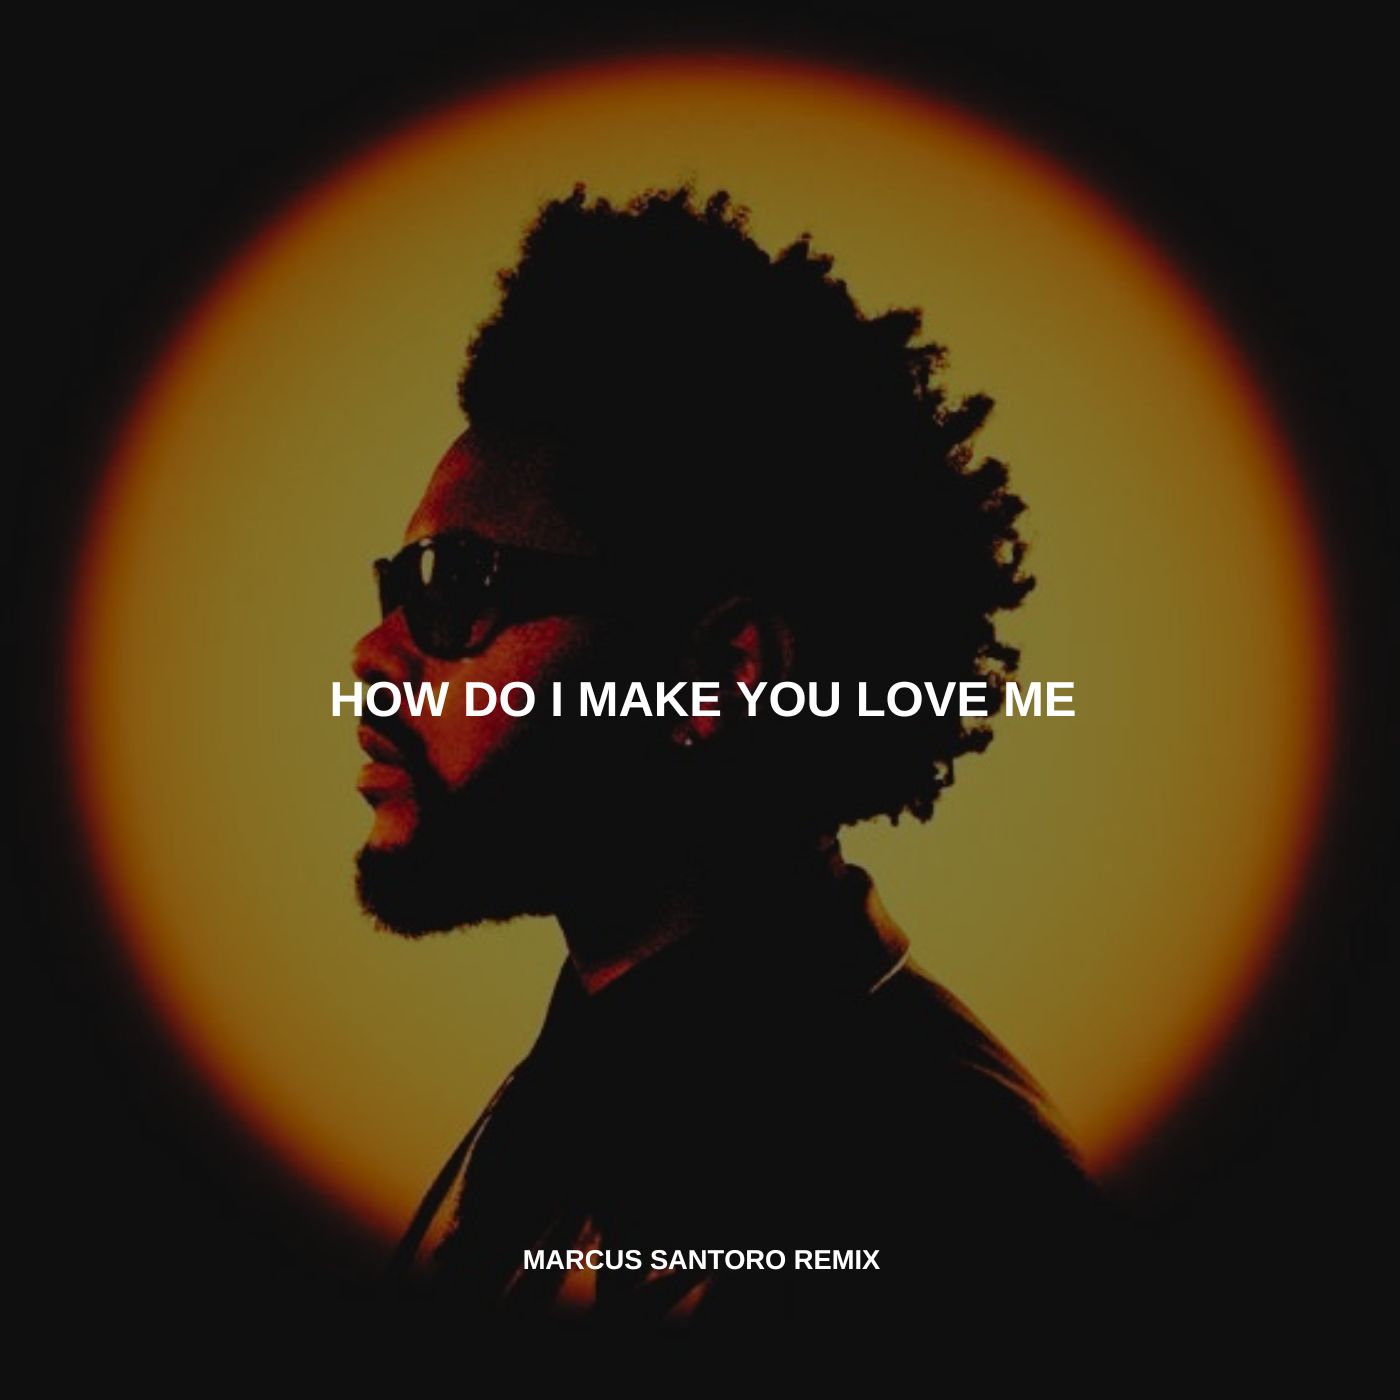 Hent The Weeknd - How Do I Make You Love Me (Marcus Santoro Remix) // FREE DOWNLOAD